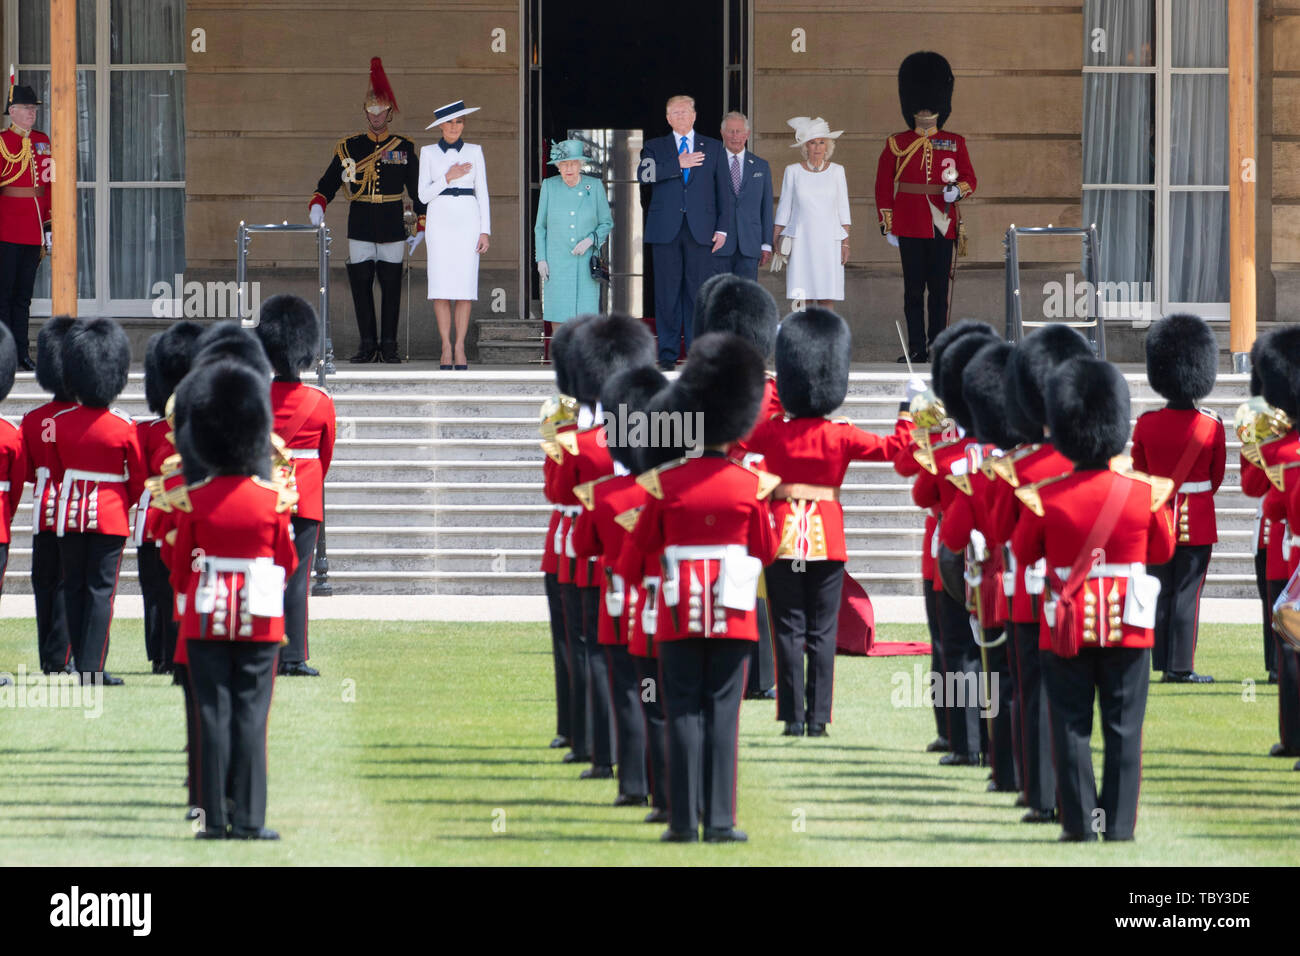 London, Britain. 3rd June, 2019. U.S. President Donald Trump (C, Rear) attends a welcome ceremony at Buckingham Palace in London, Britain, on June 3, 2019. U.S. President Donald Trump arrived in London on Monday to start his three-day state visit to Britain as widespread protests against him are set to take place. Credit: Ray Tang/Xinhua/Alamy Live News Stock Photo